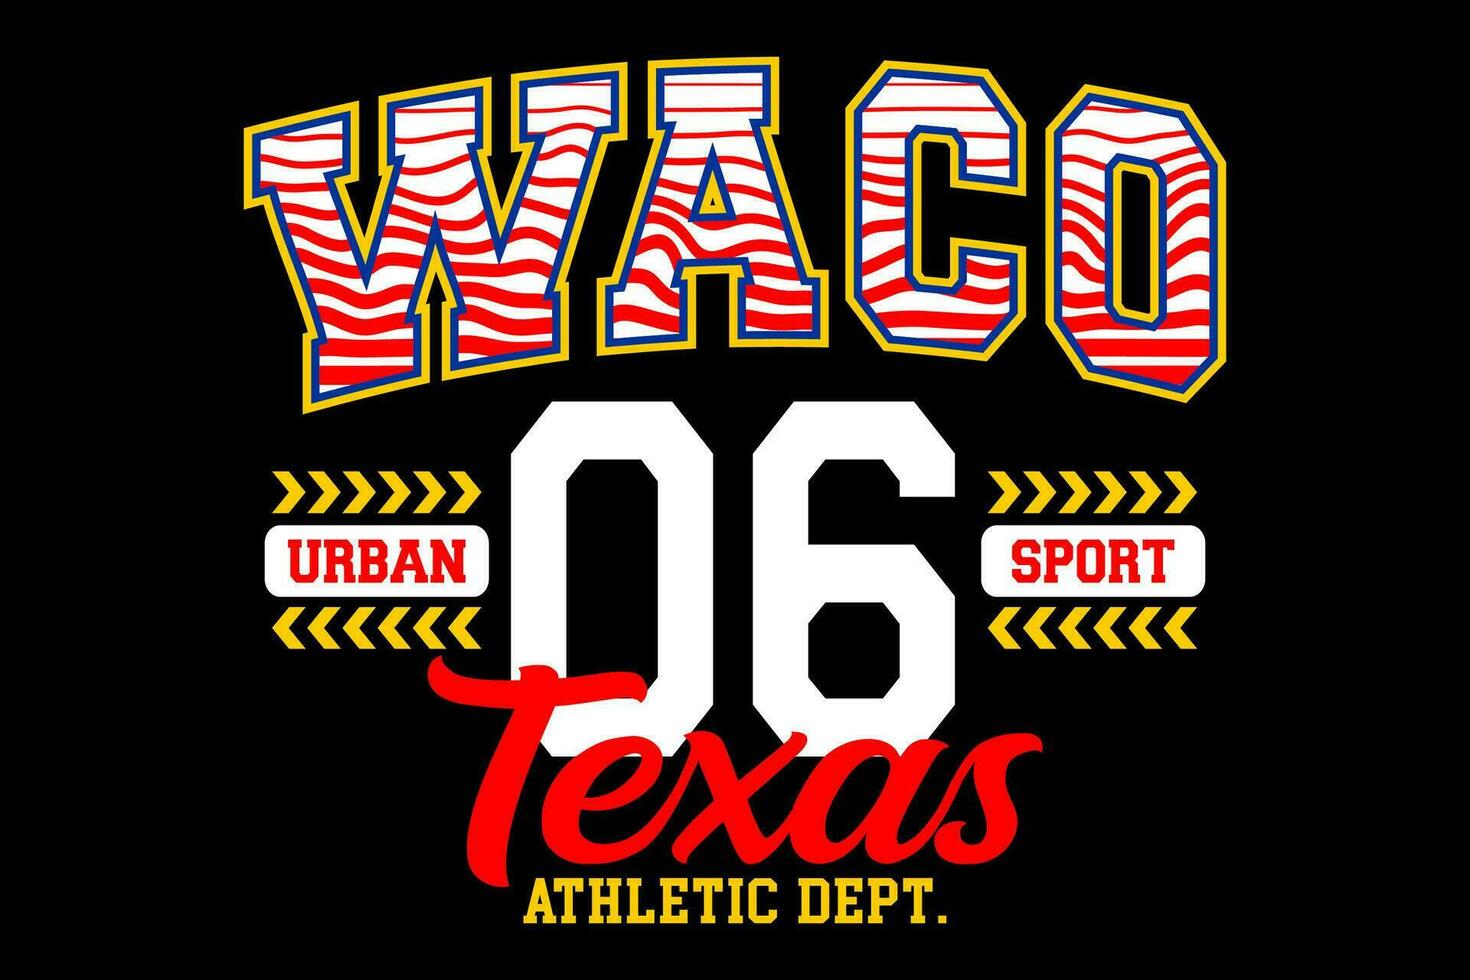 Waco Texas vintage college, for print on t shirts etc. vector